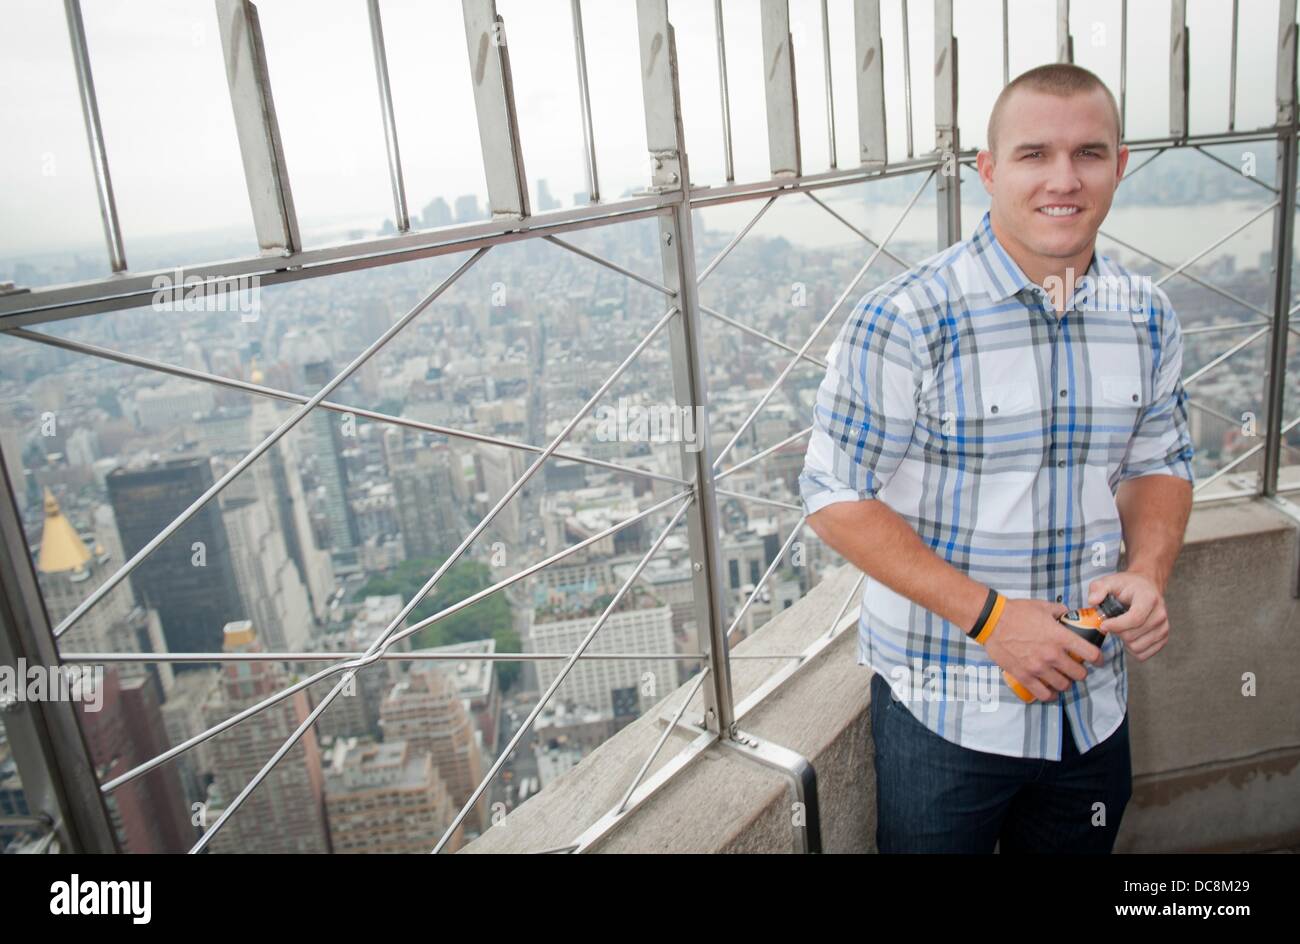 Manhattan, New York, USA. 12th Aug, 2013. Los Angeles Angels of Anaheim outfielder MIKE TROUT tours the Empire State Building's 86th floor Observatory and is interviewed at Foley's NY Pub & Restaurant on 33rd Street, Monday, August 12, 2013. Credit:  Bryan Smith/ZUMAPRESS.com/Alamy Live News Stock Photo